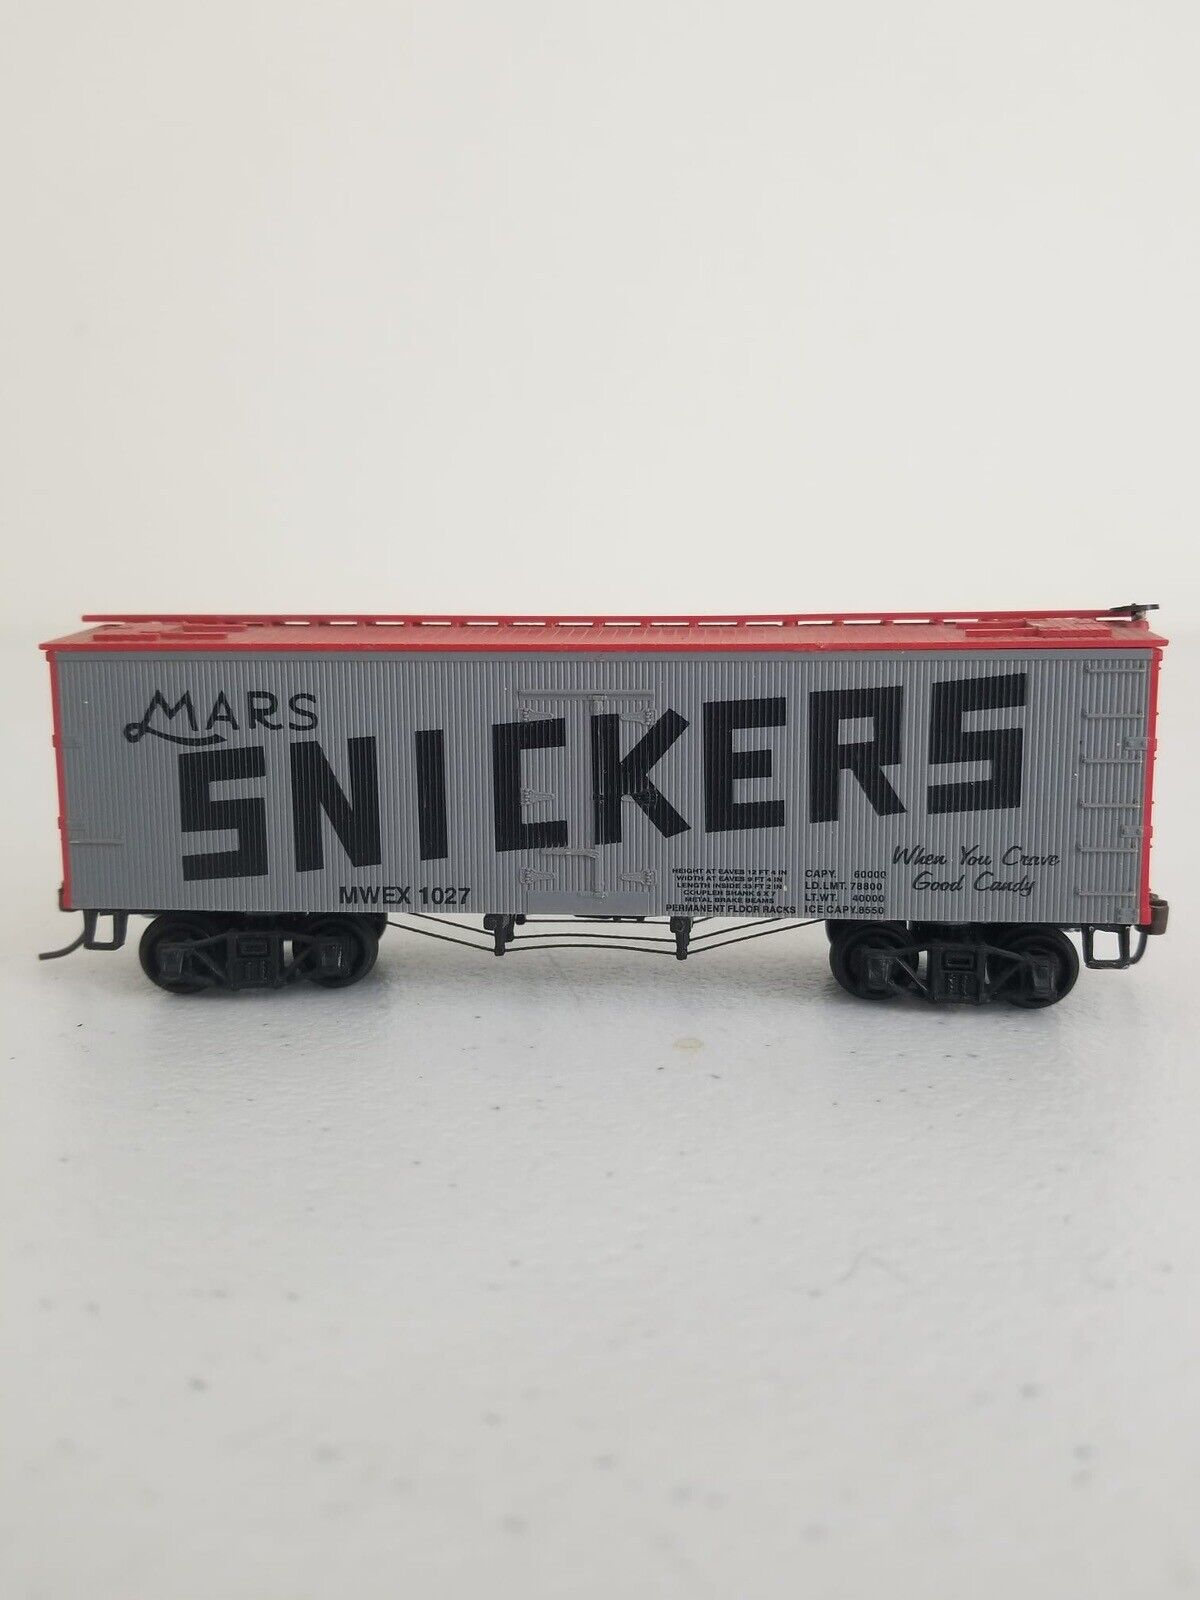 Vintage Train Car Lot: Snickers, Hormel, Southern Pacific - 6 Collectible Boxcars - TreasuTiques